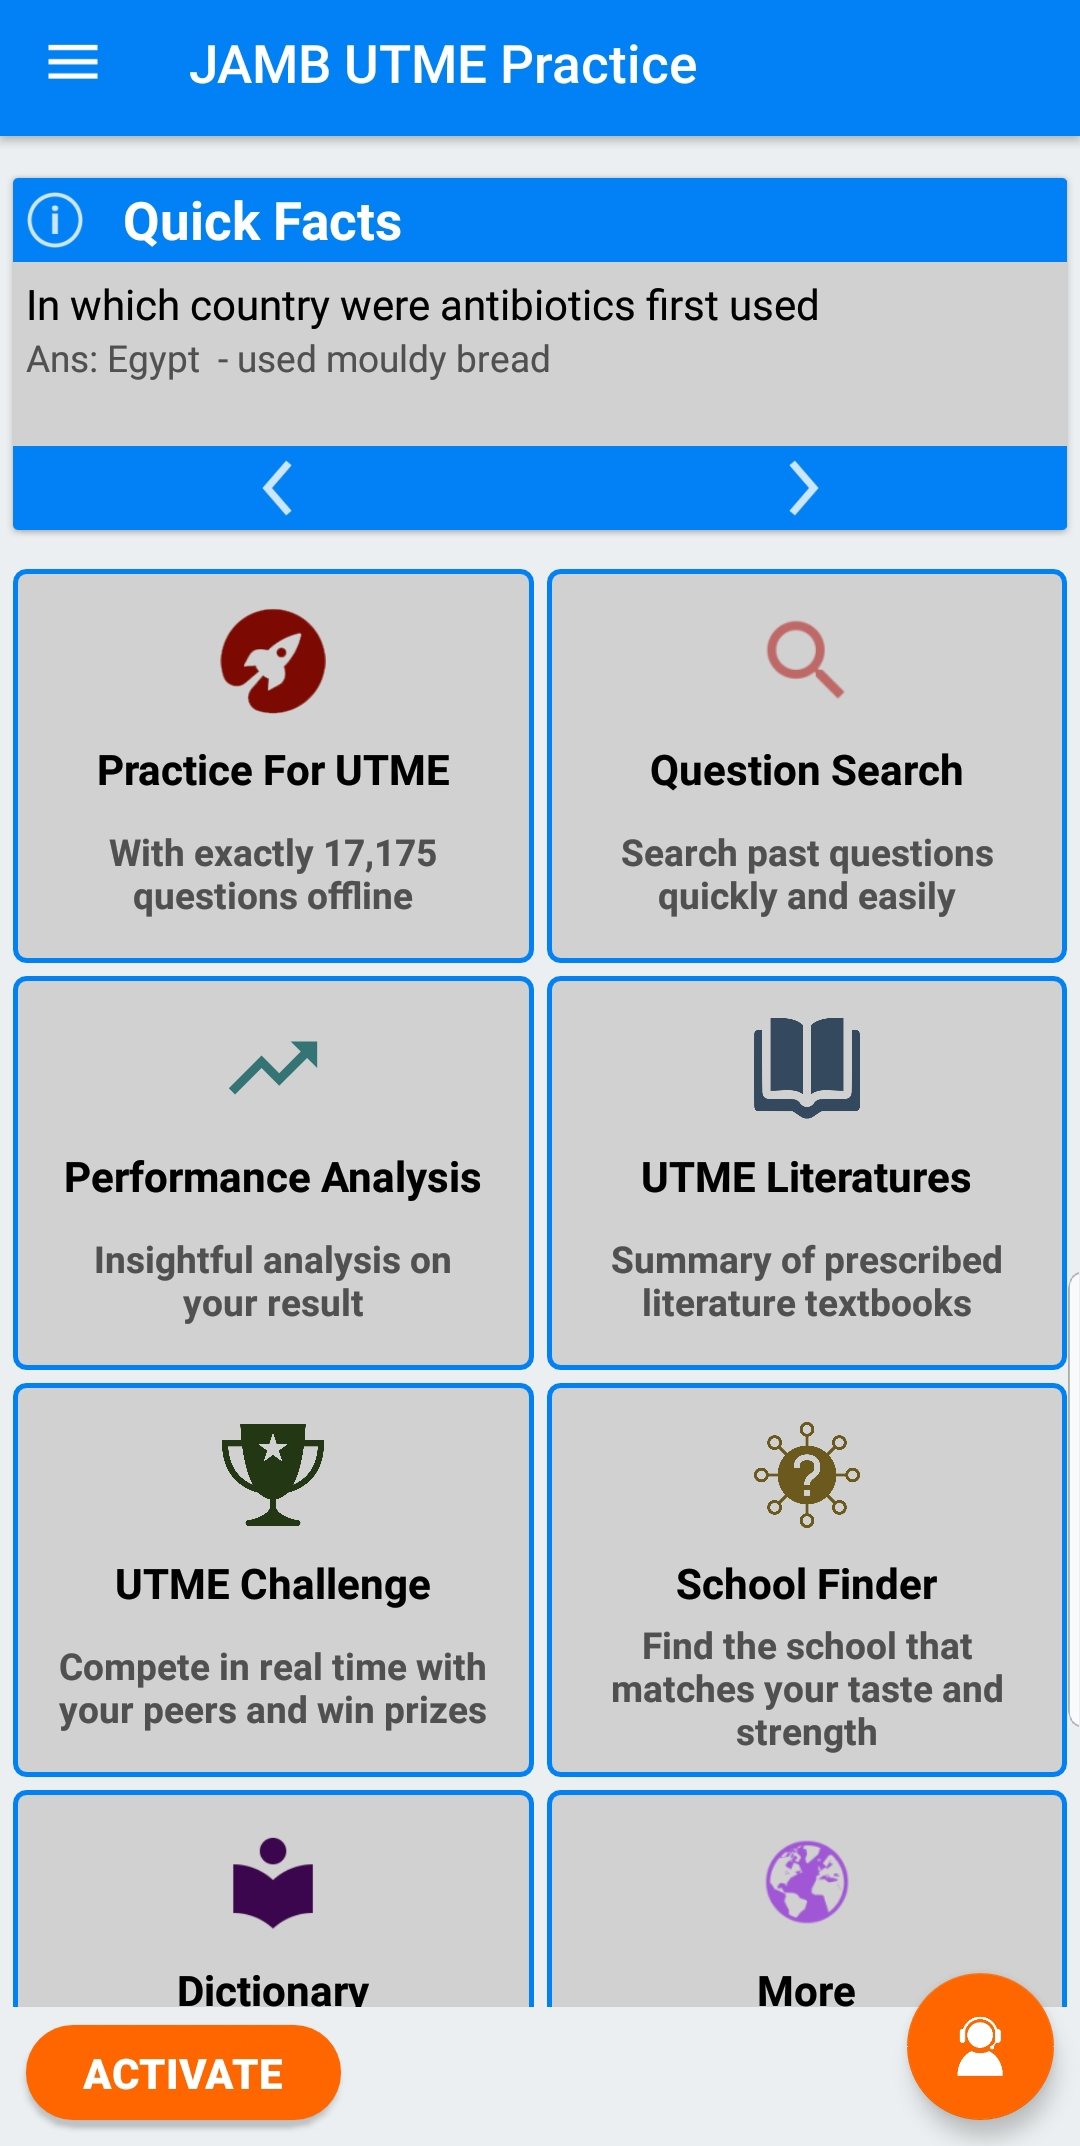 Other Features of the UTME CBT Practice Software